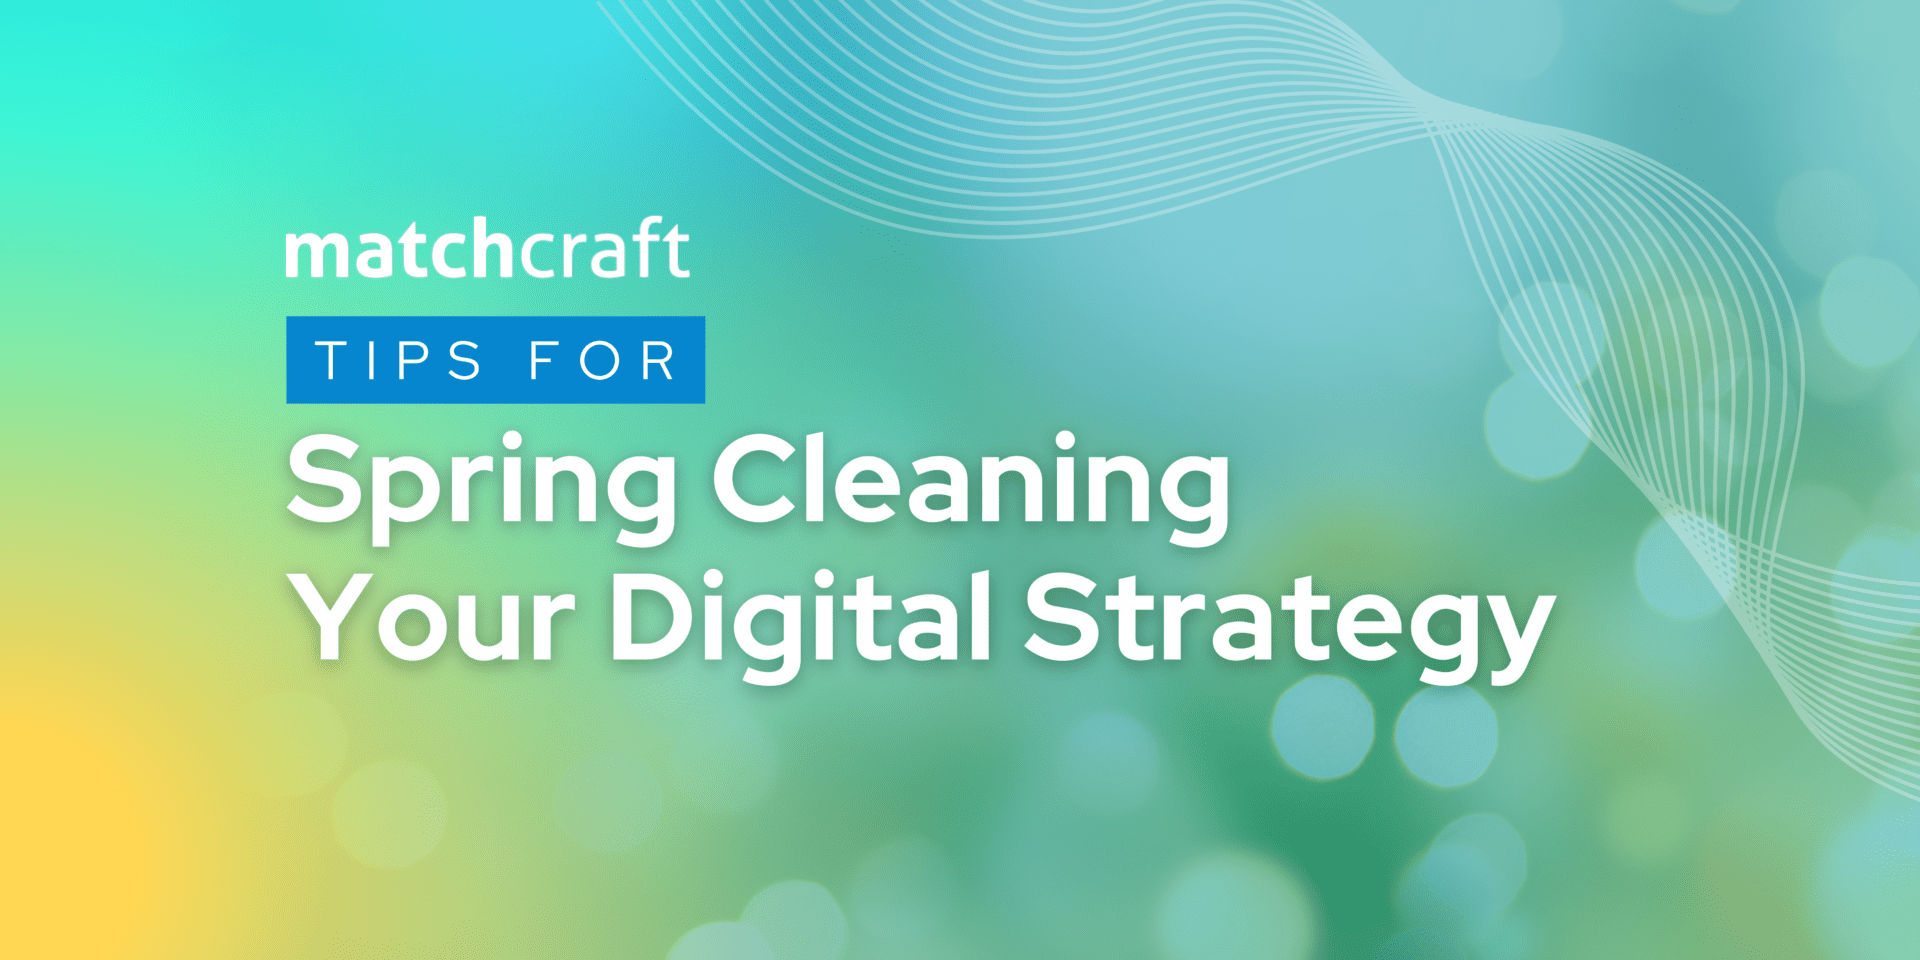 Graphic showing the MatchCraft logo and the text “Tips for Spring Cleaning Your Digital Strategy”